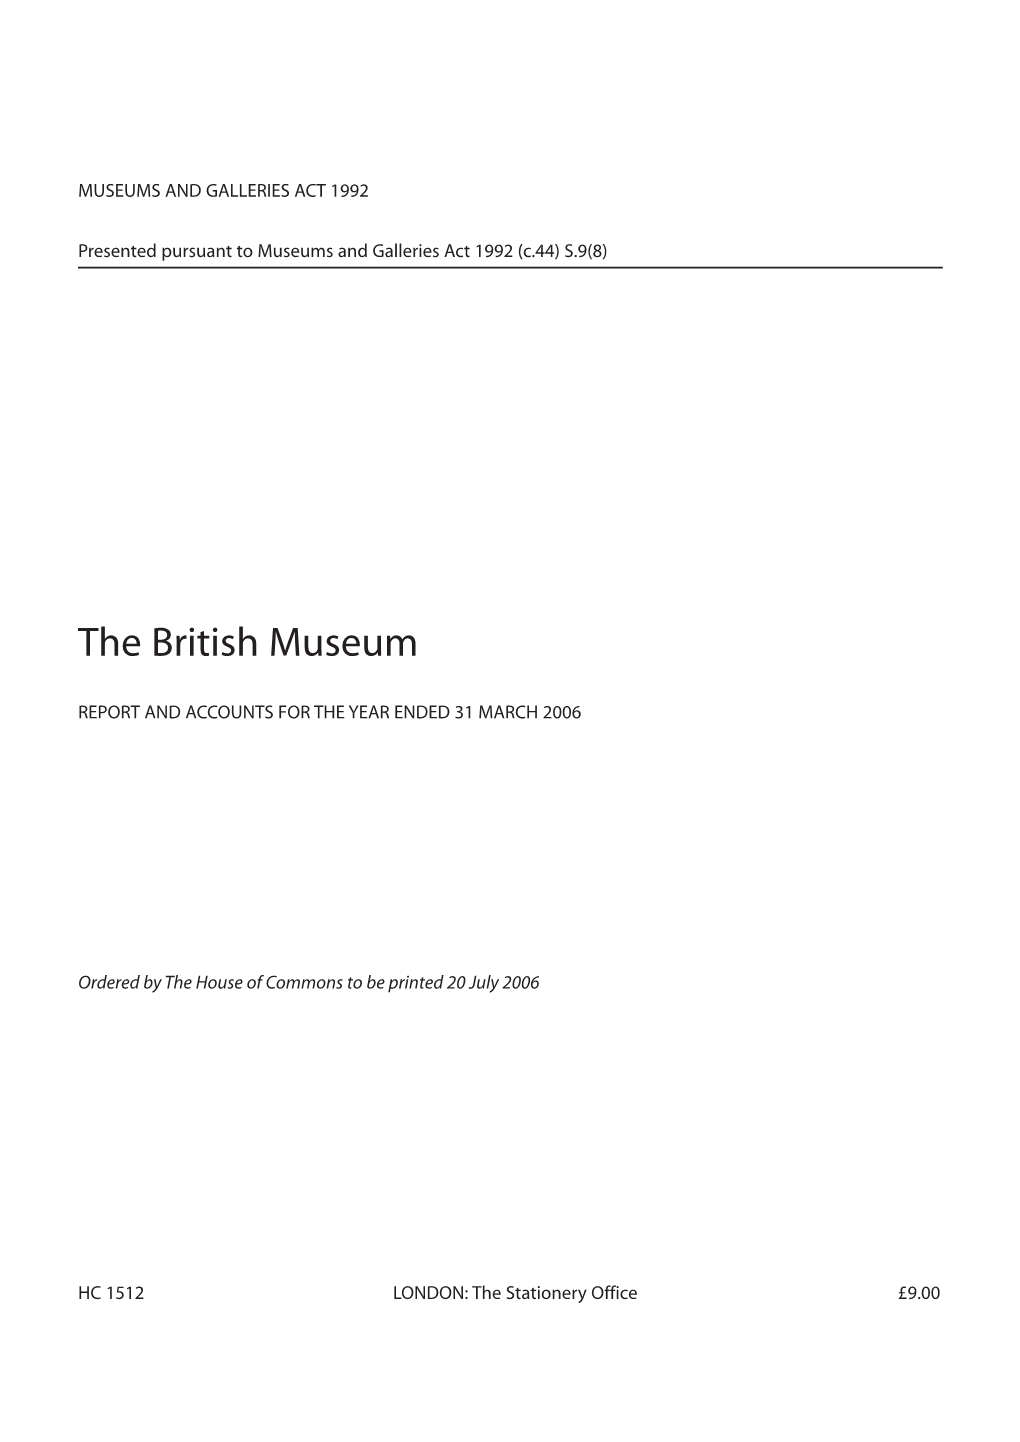 The British Museum Report and Accounts for the Year